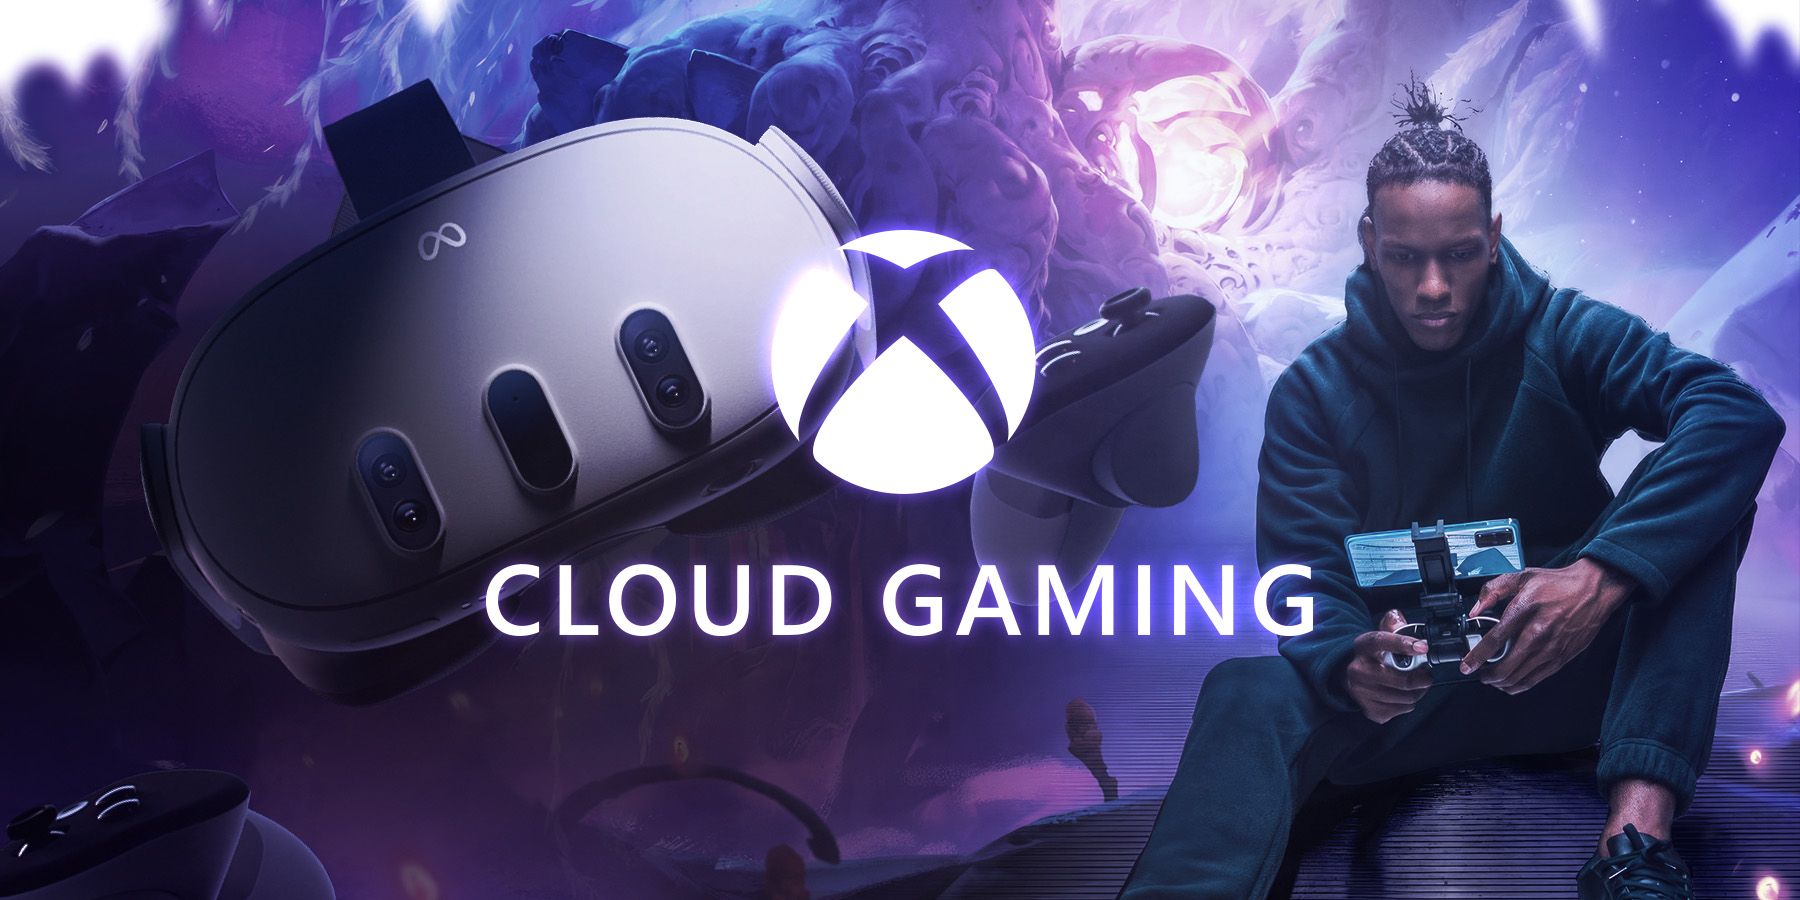 Xbox Cloud Gaming launches on Meta's Quest VR headsets - The Verge